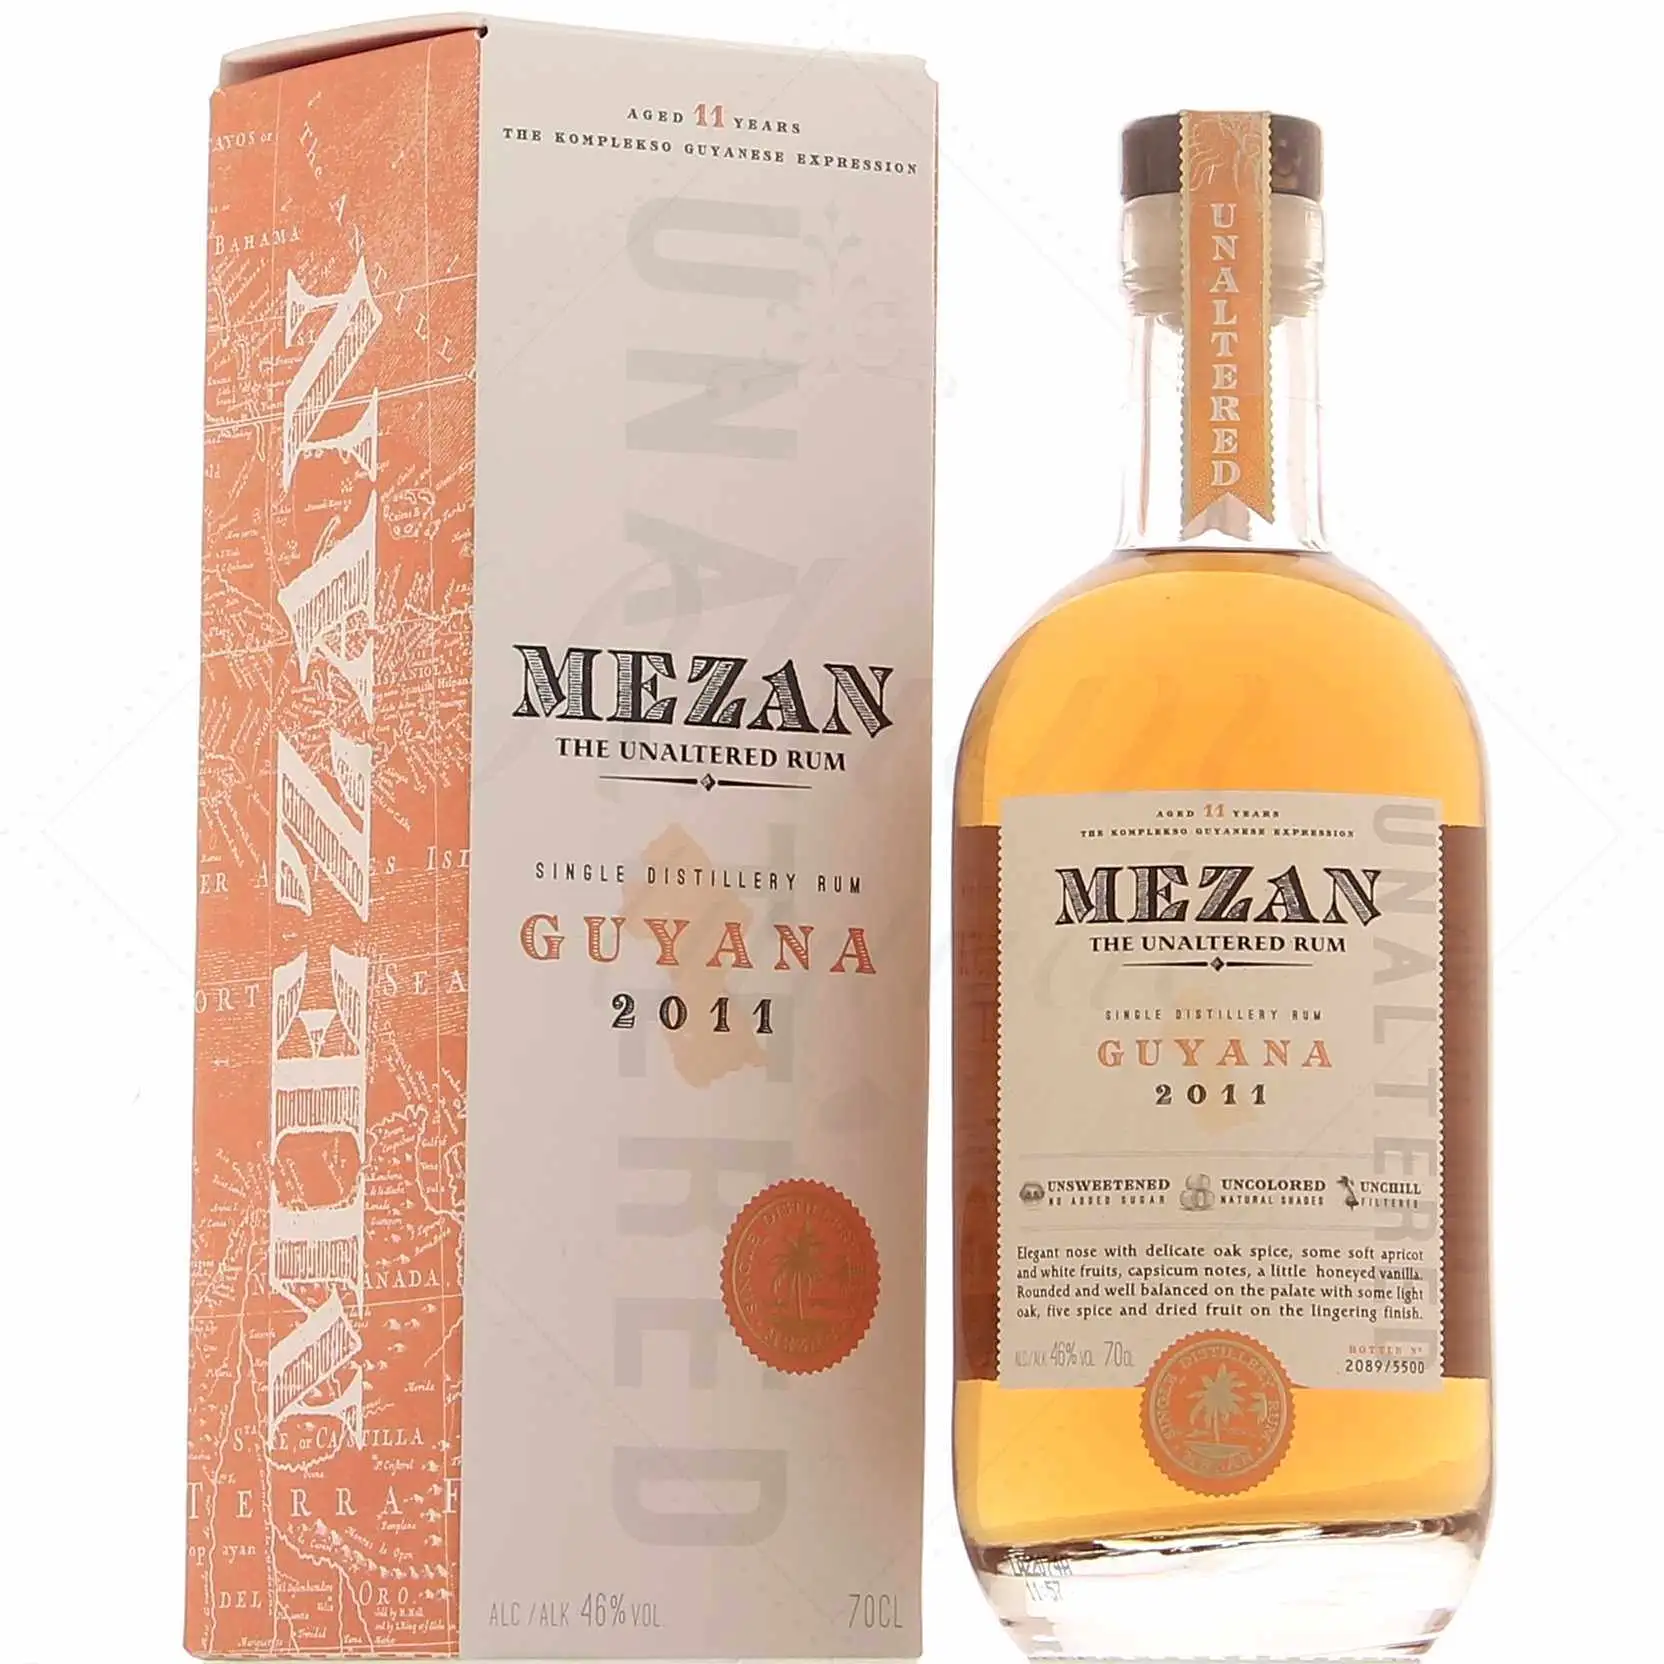 Image of the front of the bottle of the rum Mezan Guyana